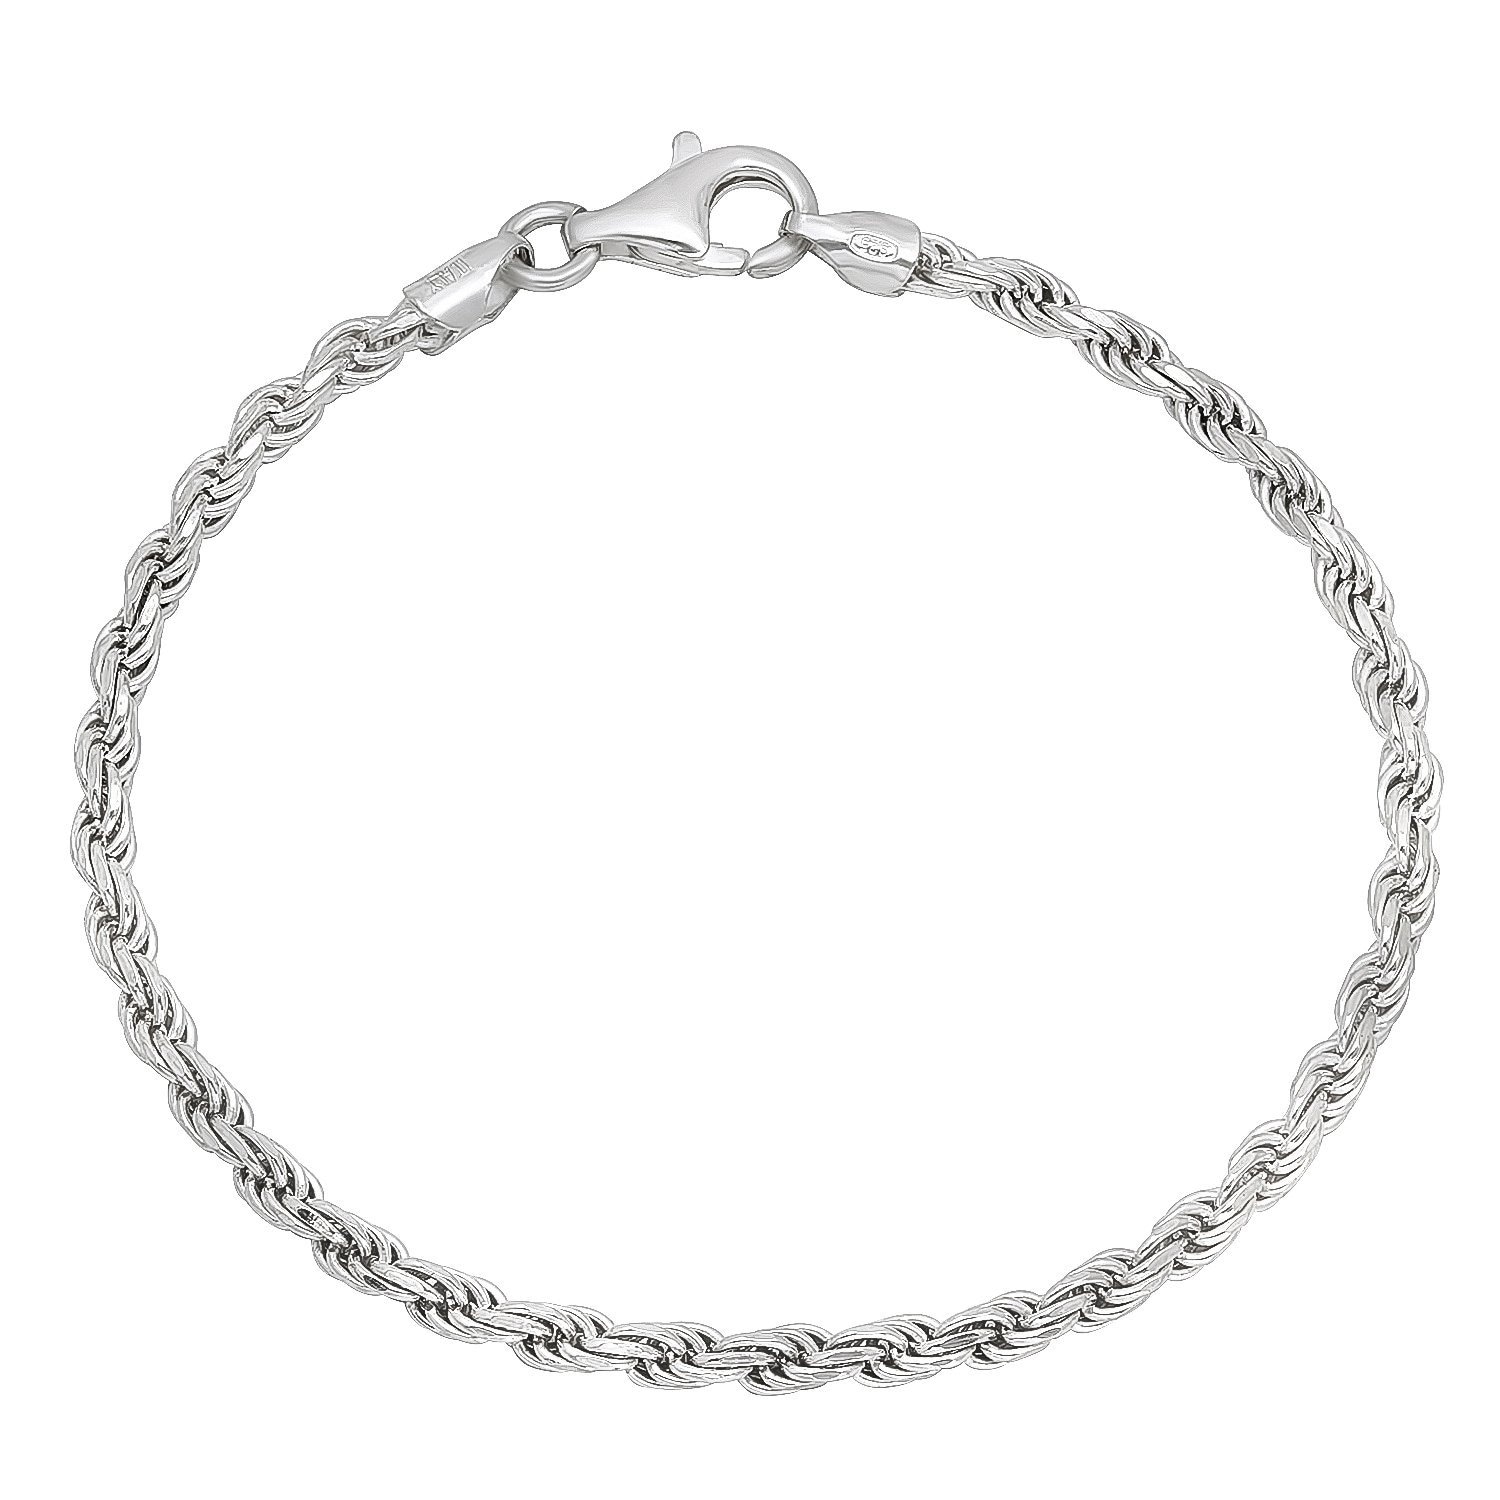 Sterling Silver Diamond Cut Rope 3.5mm Bracelet Anklet Necklace Chain Italian .925 Jewelry 